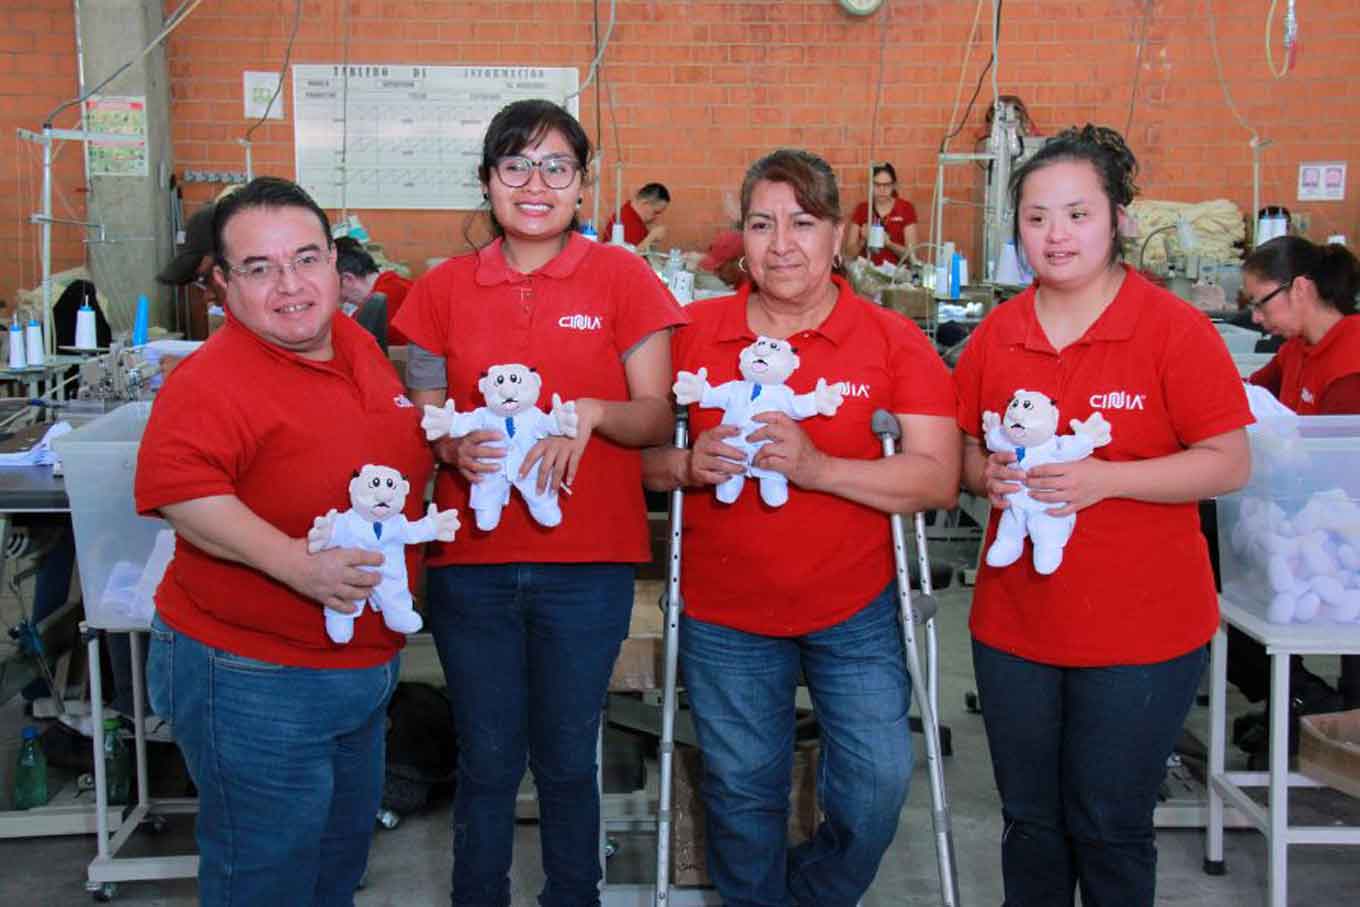 Four people hold Dr. Simi dolls in a factory